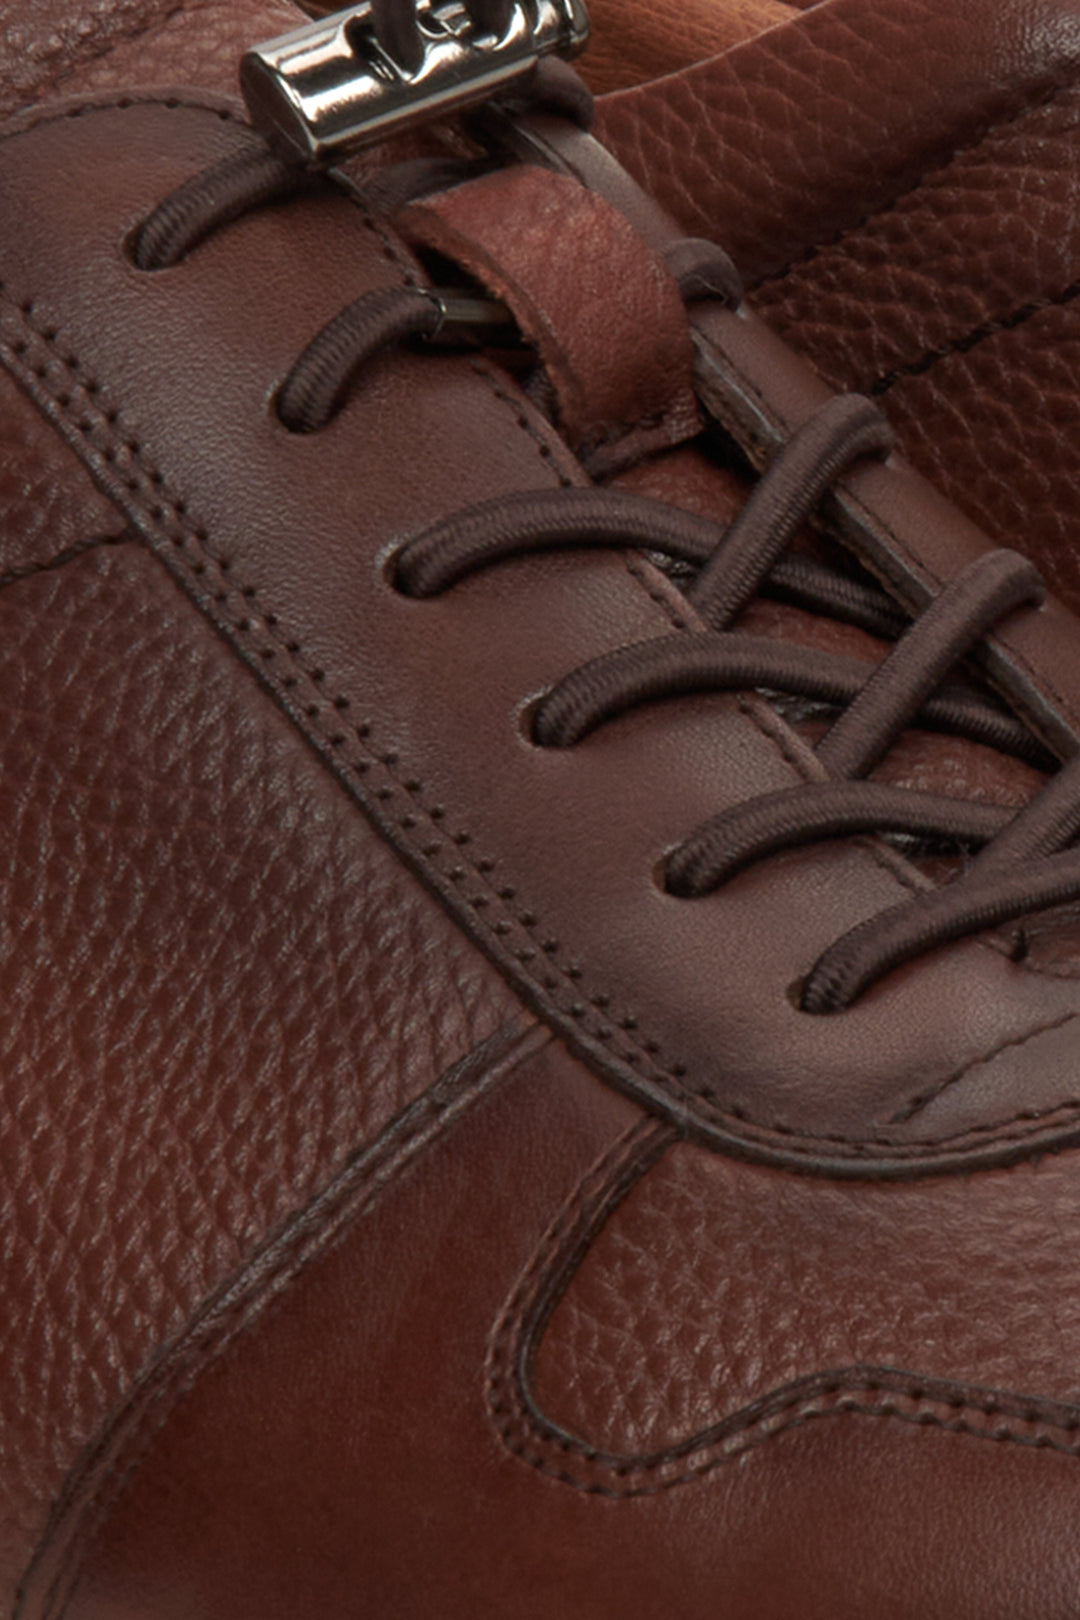 Men's brown leather sneakers with an elastic cuff - close-up on the details.